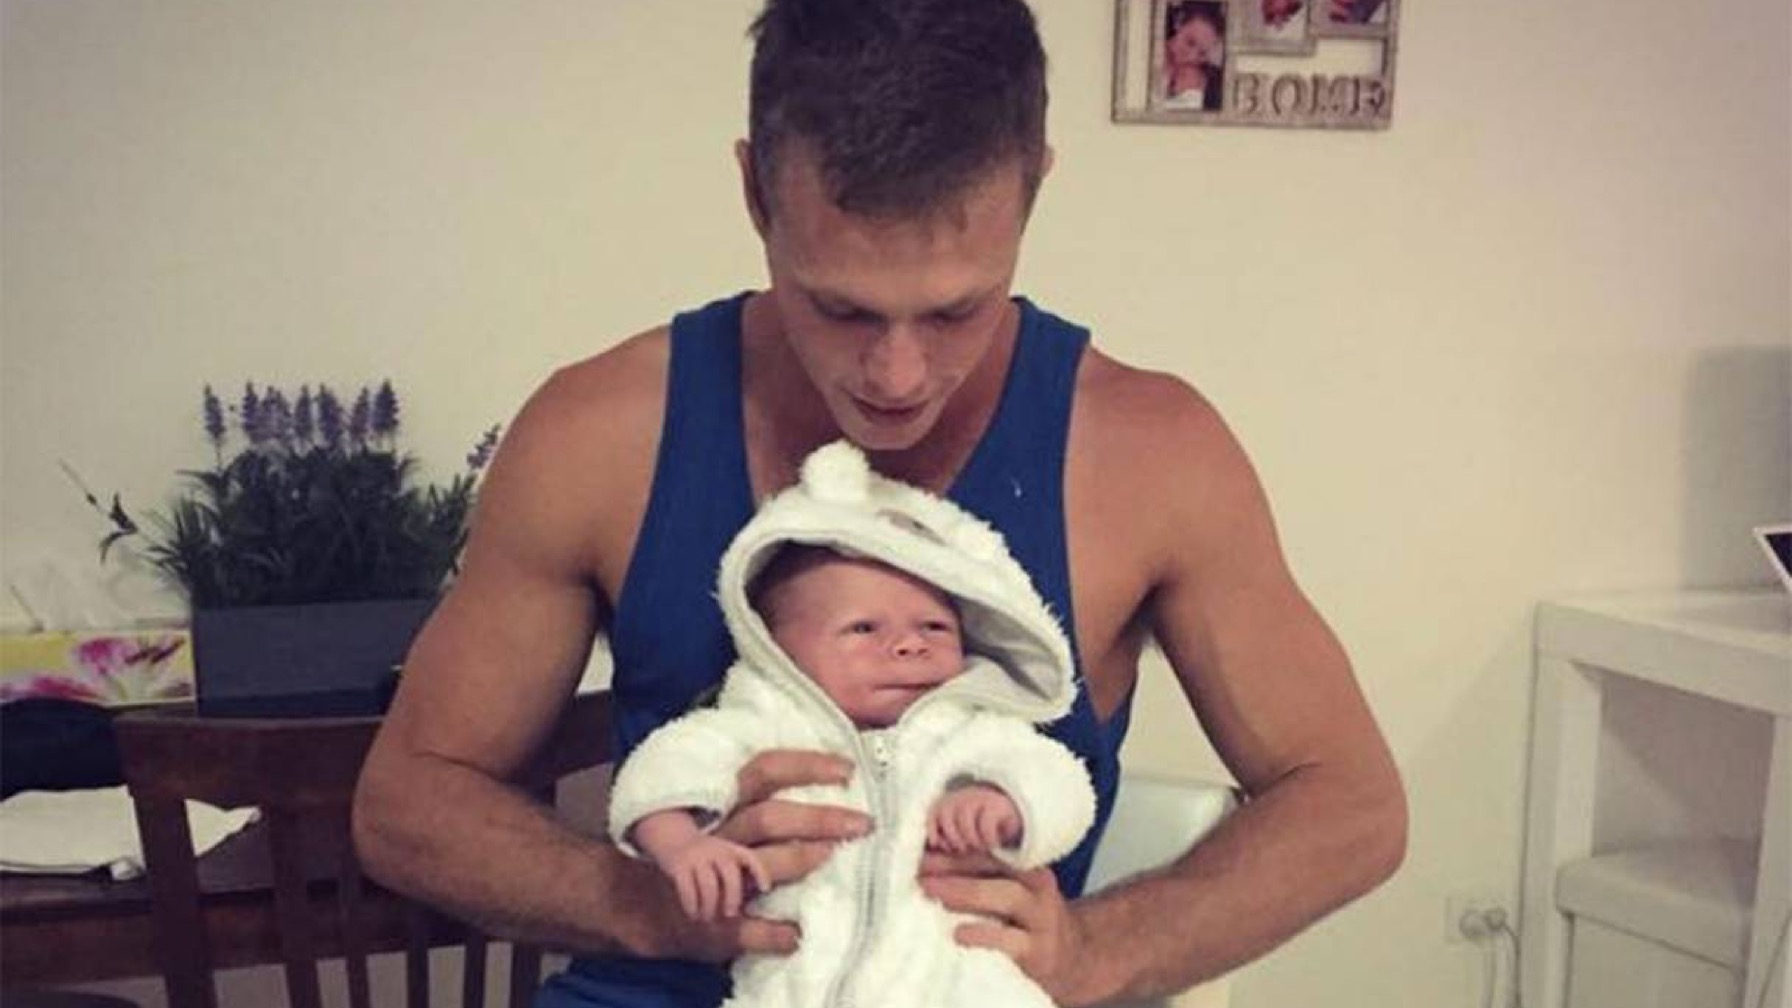 Kind 23-Year-Old Student-Athlete Becomes World's Youngest "Grandpa"